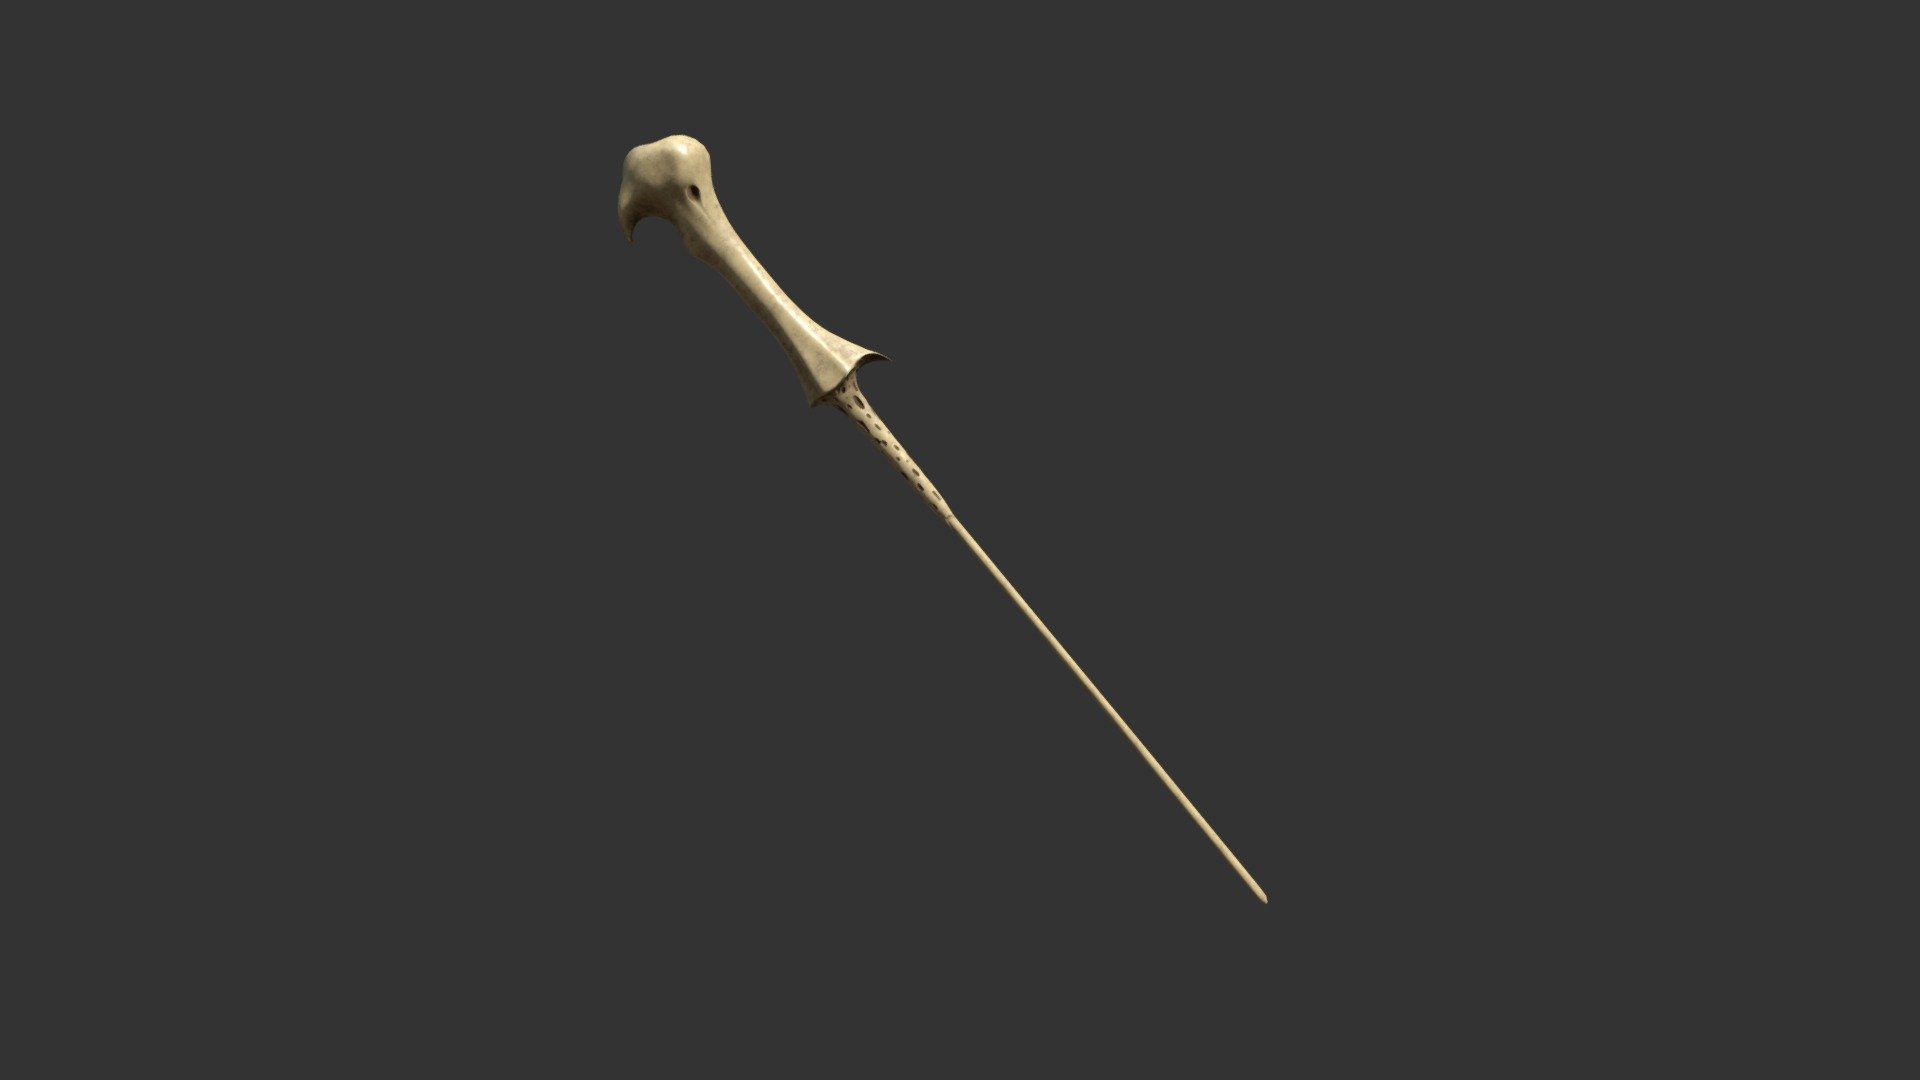 New 3D model! This time I did it using ZBrush and Substance Painter 2. Hope you like it! - Voldemort's wand - Buy Royalty Free 3D model by ivamargar 3d model